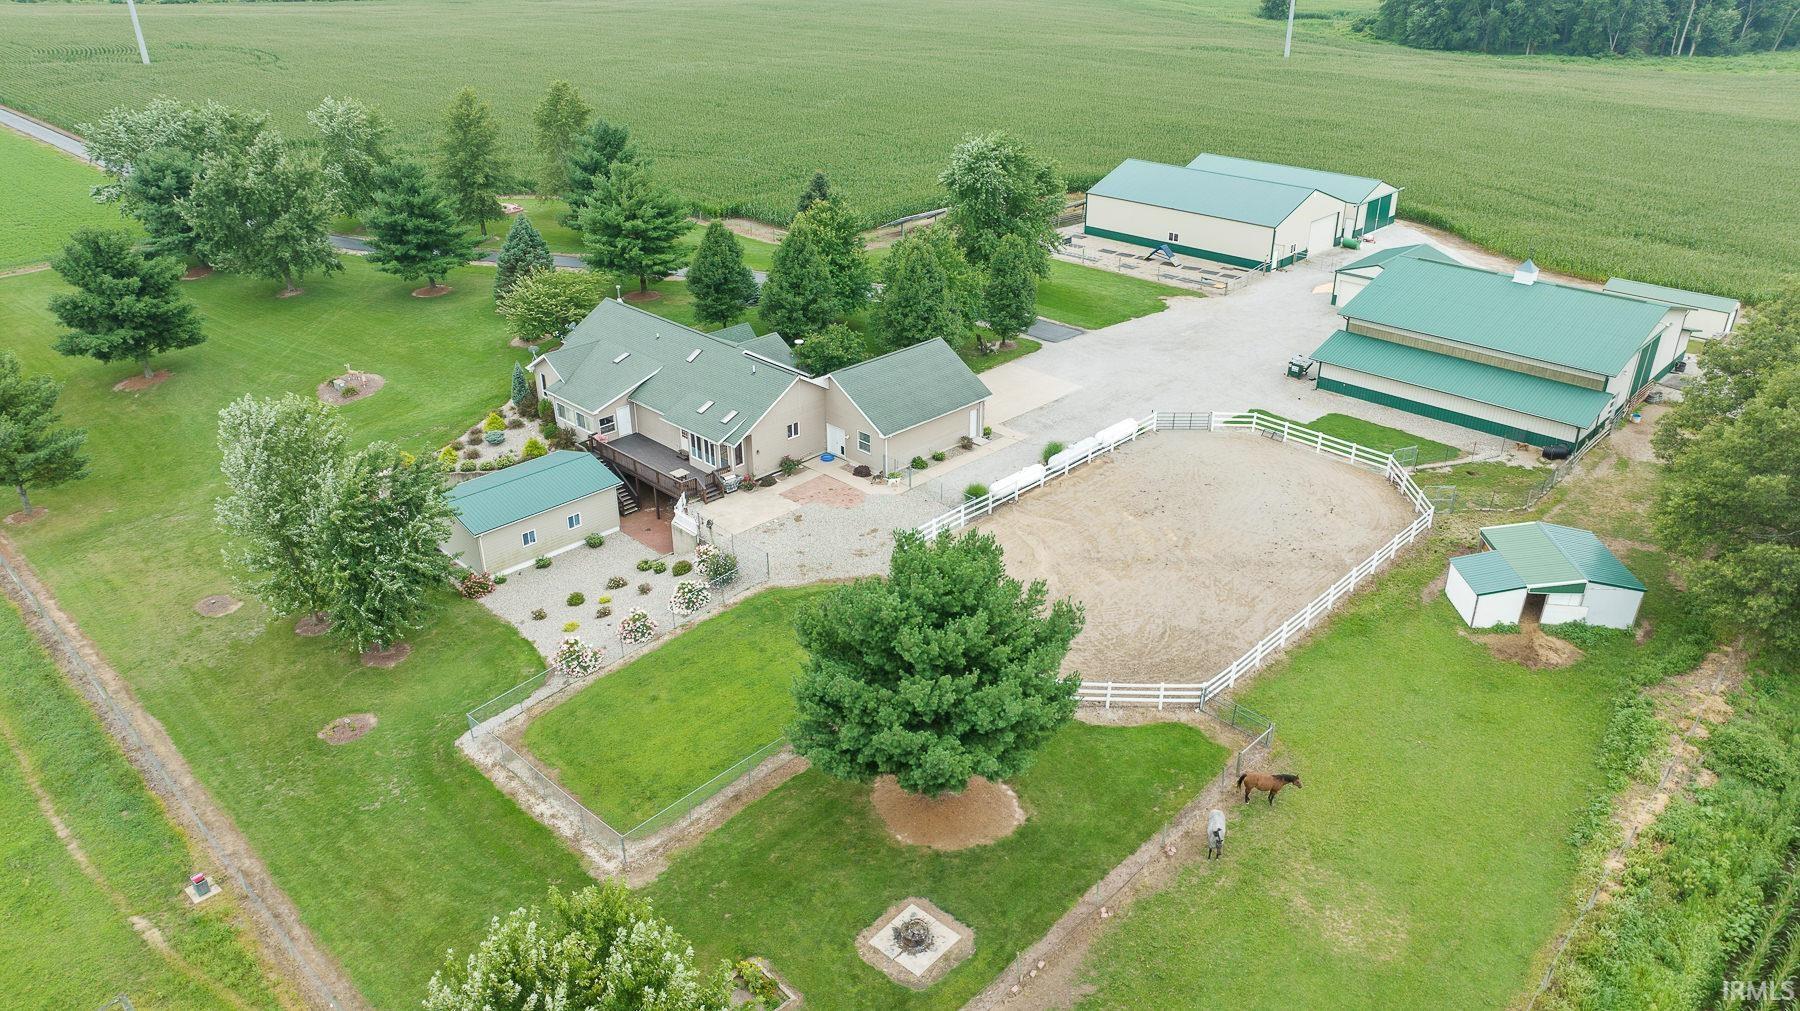 Welcome to a home/land that has one of everything you want or need. Off the 2,000+ ft freshly paved drive sits a 5-bedroom 3 Full bath home with a rare 251+/- acres. Solar panels(owned) were installed in 2018. The horse barn is a 60x84 - 48x72 pole barn constructed in 2019 and another constructed in 32x72 2020. This home has a horse stable in the barn that attach to a riding arena and a large paddock that the home overlooks. There are 122+/-ac of great tiled tillable ground. The planted food plot alfalfa fields with tower blinds make for exceptional hunting. This land has produced 2 Boone and Crocket bucks and 3 in the Indiana record book with many other great whitetails. There are some wetlands to the NE corner that brings in many duck and many other flighted animals for great views/hunting. This property borders DNR wetlands which makes this tract hunt bigger and expands the views. Many things can be said about this home, but you need to view it to take it all in!